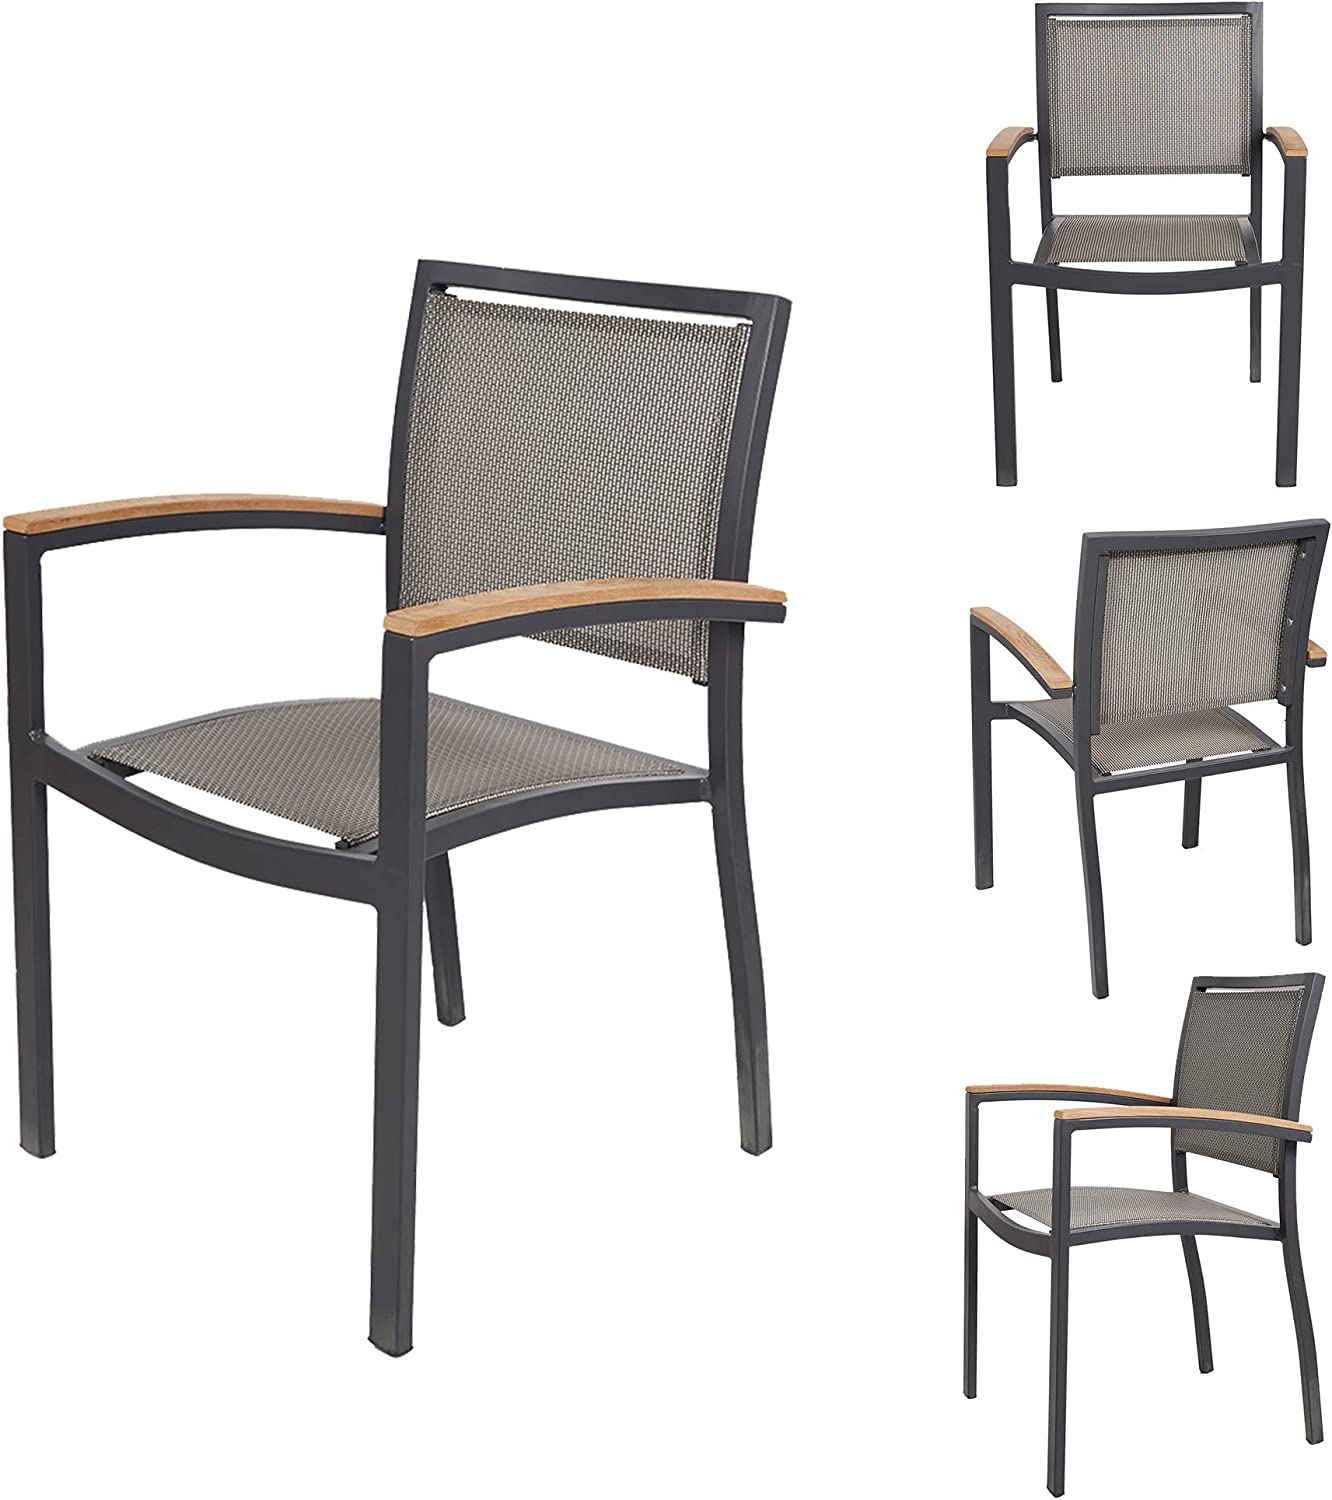 Outdoor Patio Dining Chairs with Teak Armrest,Textilene Mesh Fabric Aluminum Frame, Gray